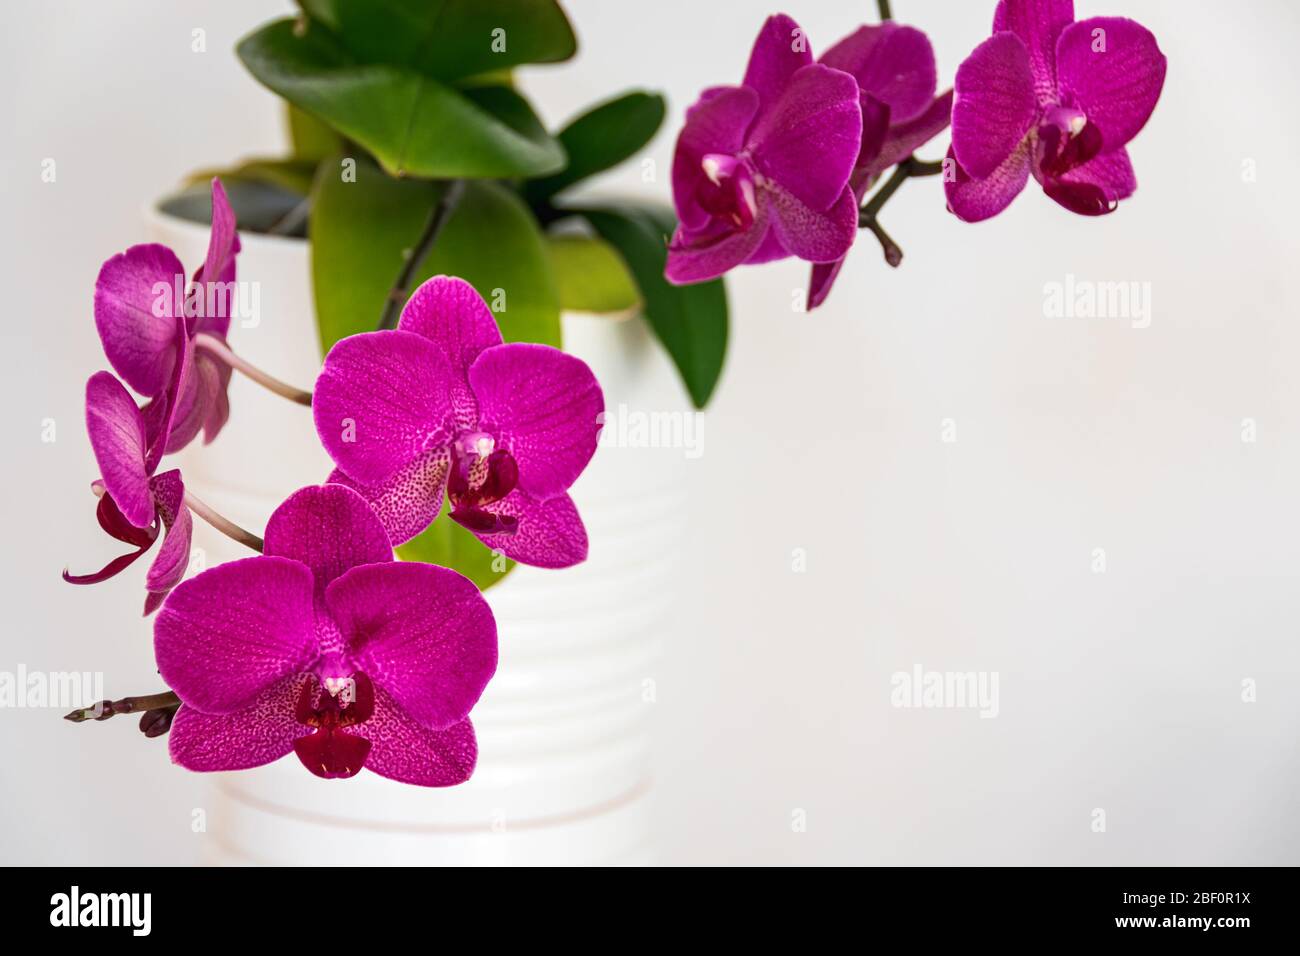 Soft focus on the striking magenta flowers of a moth orchid (phalaenopsis) houseplant on a white background. Beautiful blooming houseplant detail. Stock Photo